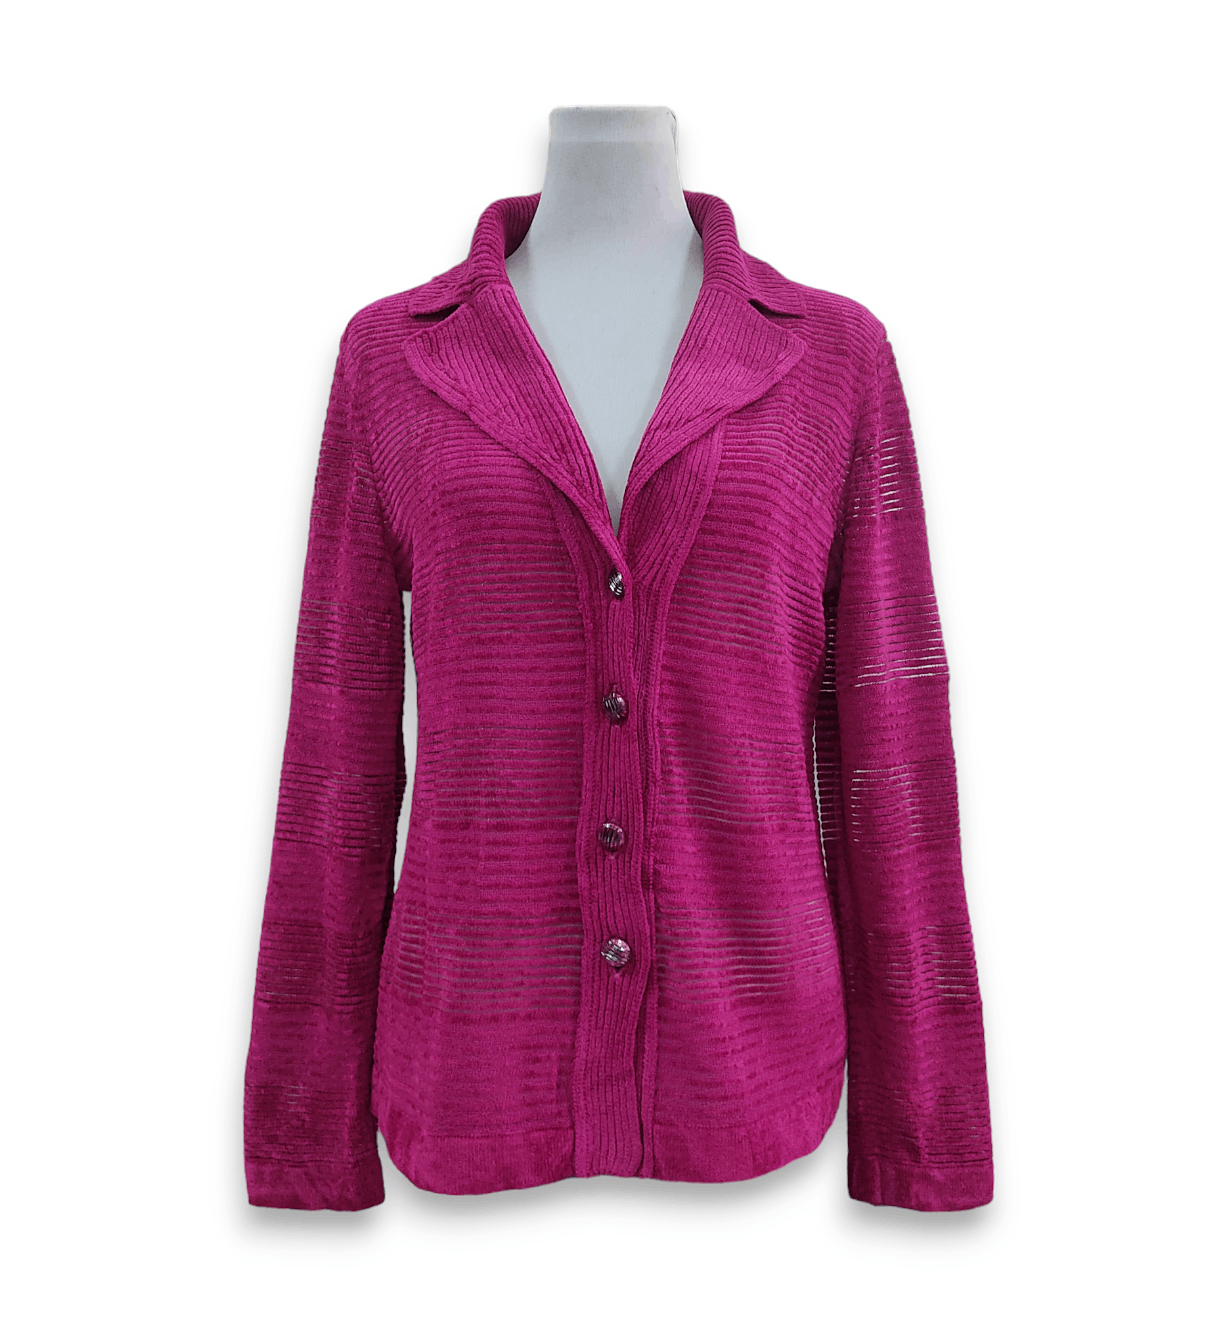 Vintage - Escada Acrylic Wool Buttons Up Cardigan Sweater - 1